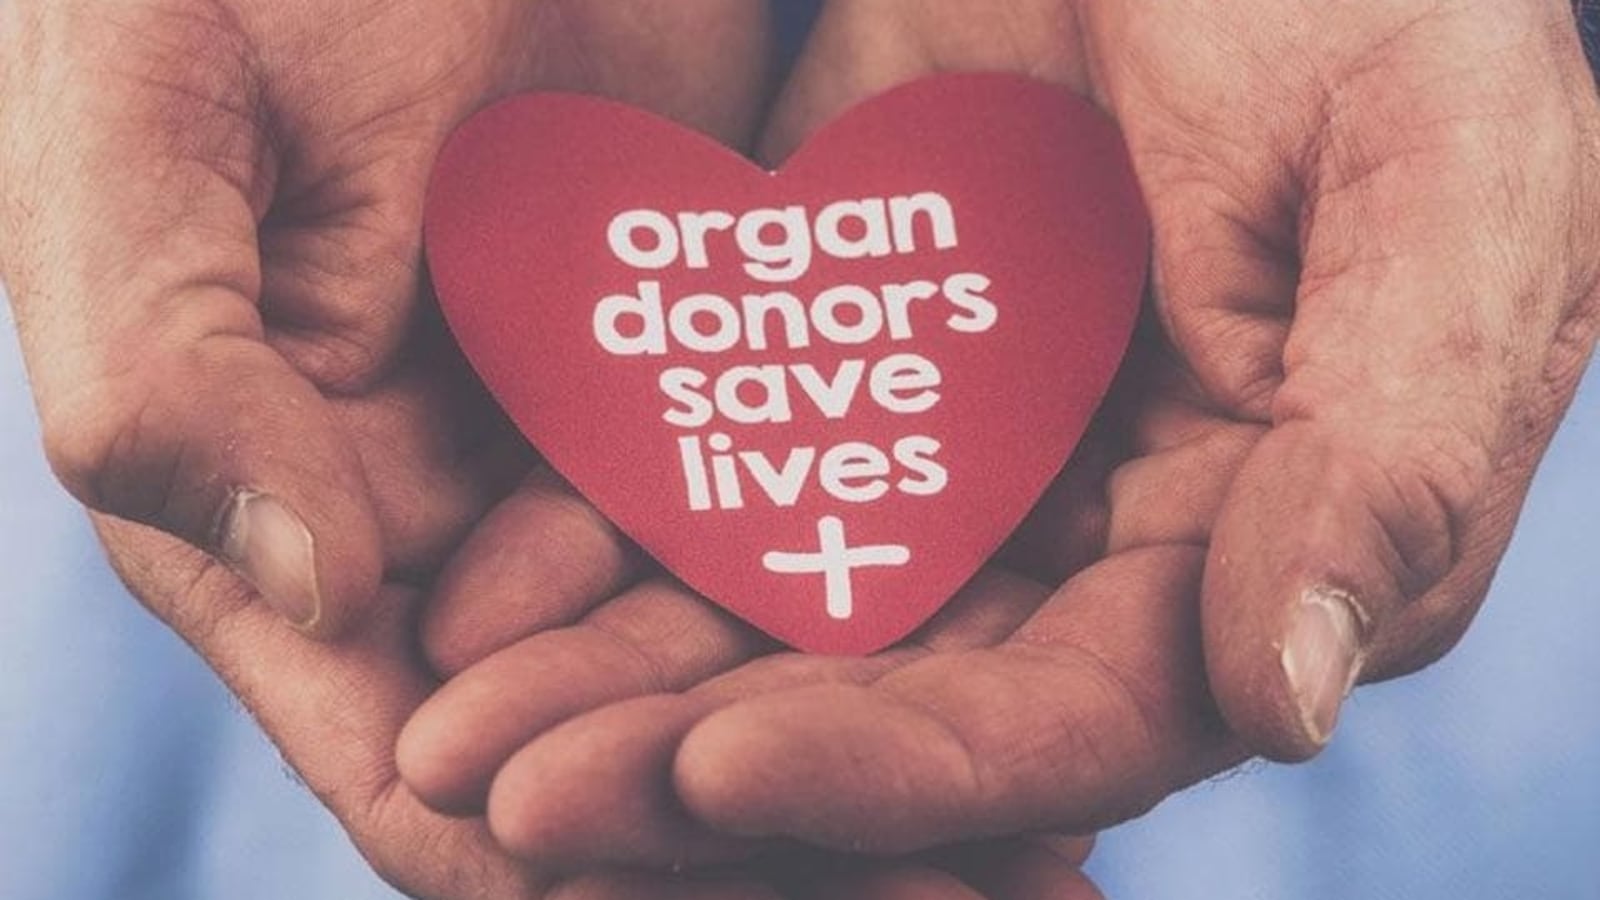 research on organ donation in india